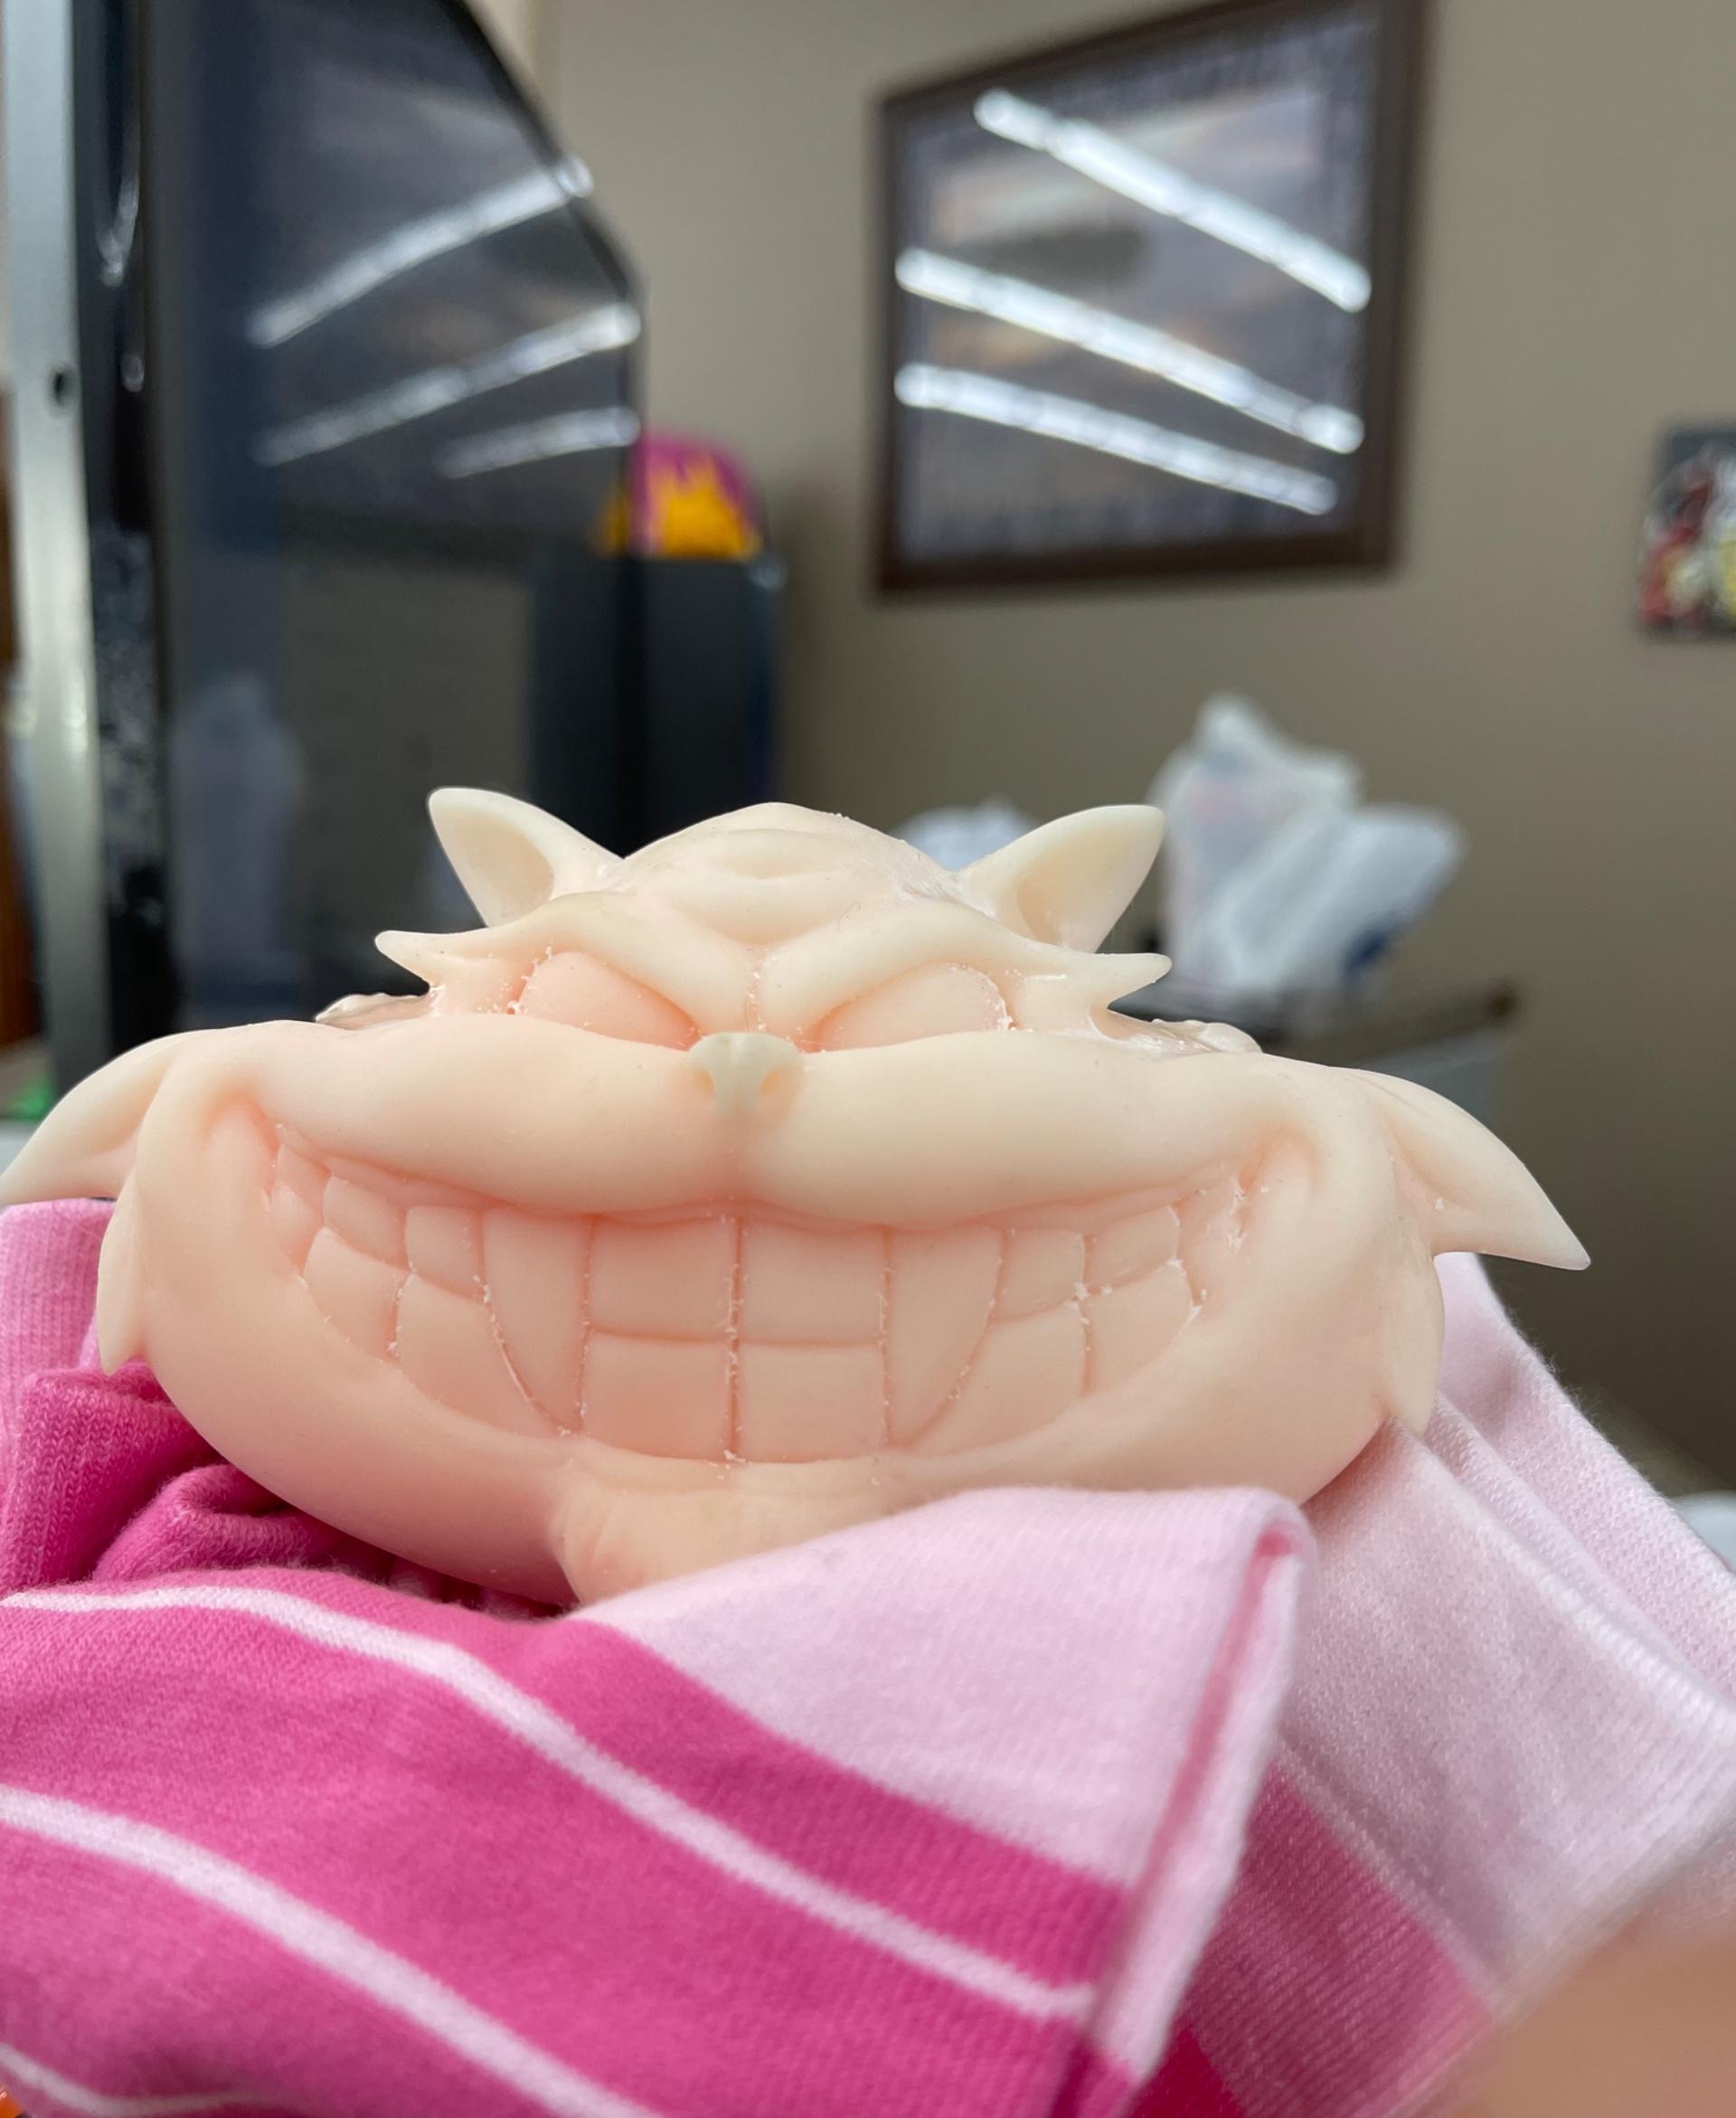 Pre Painted Cheshire Cat! - .3MF File - Resin printed Cheshire Cat!!! Looks amazing on the breast cancer awareness socks. - 3d model